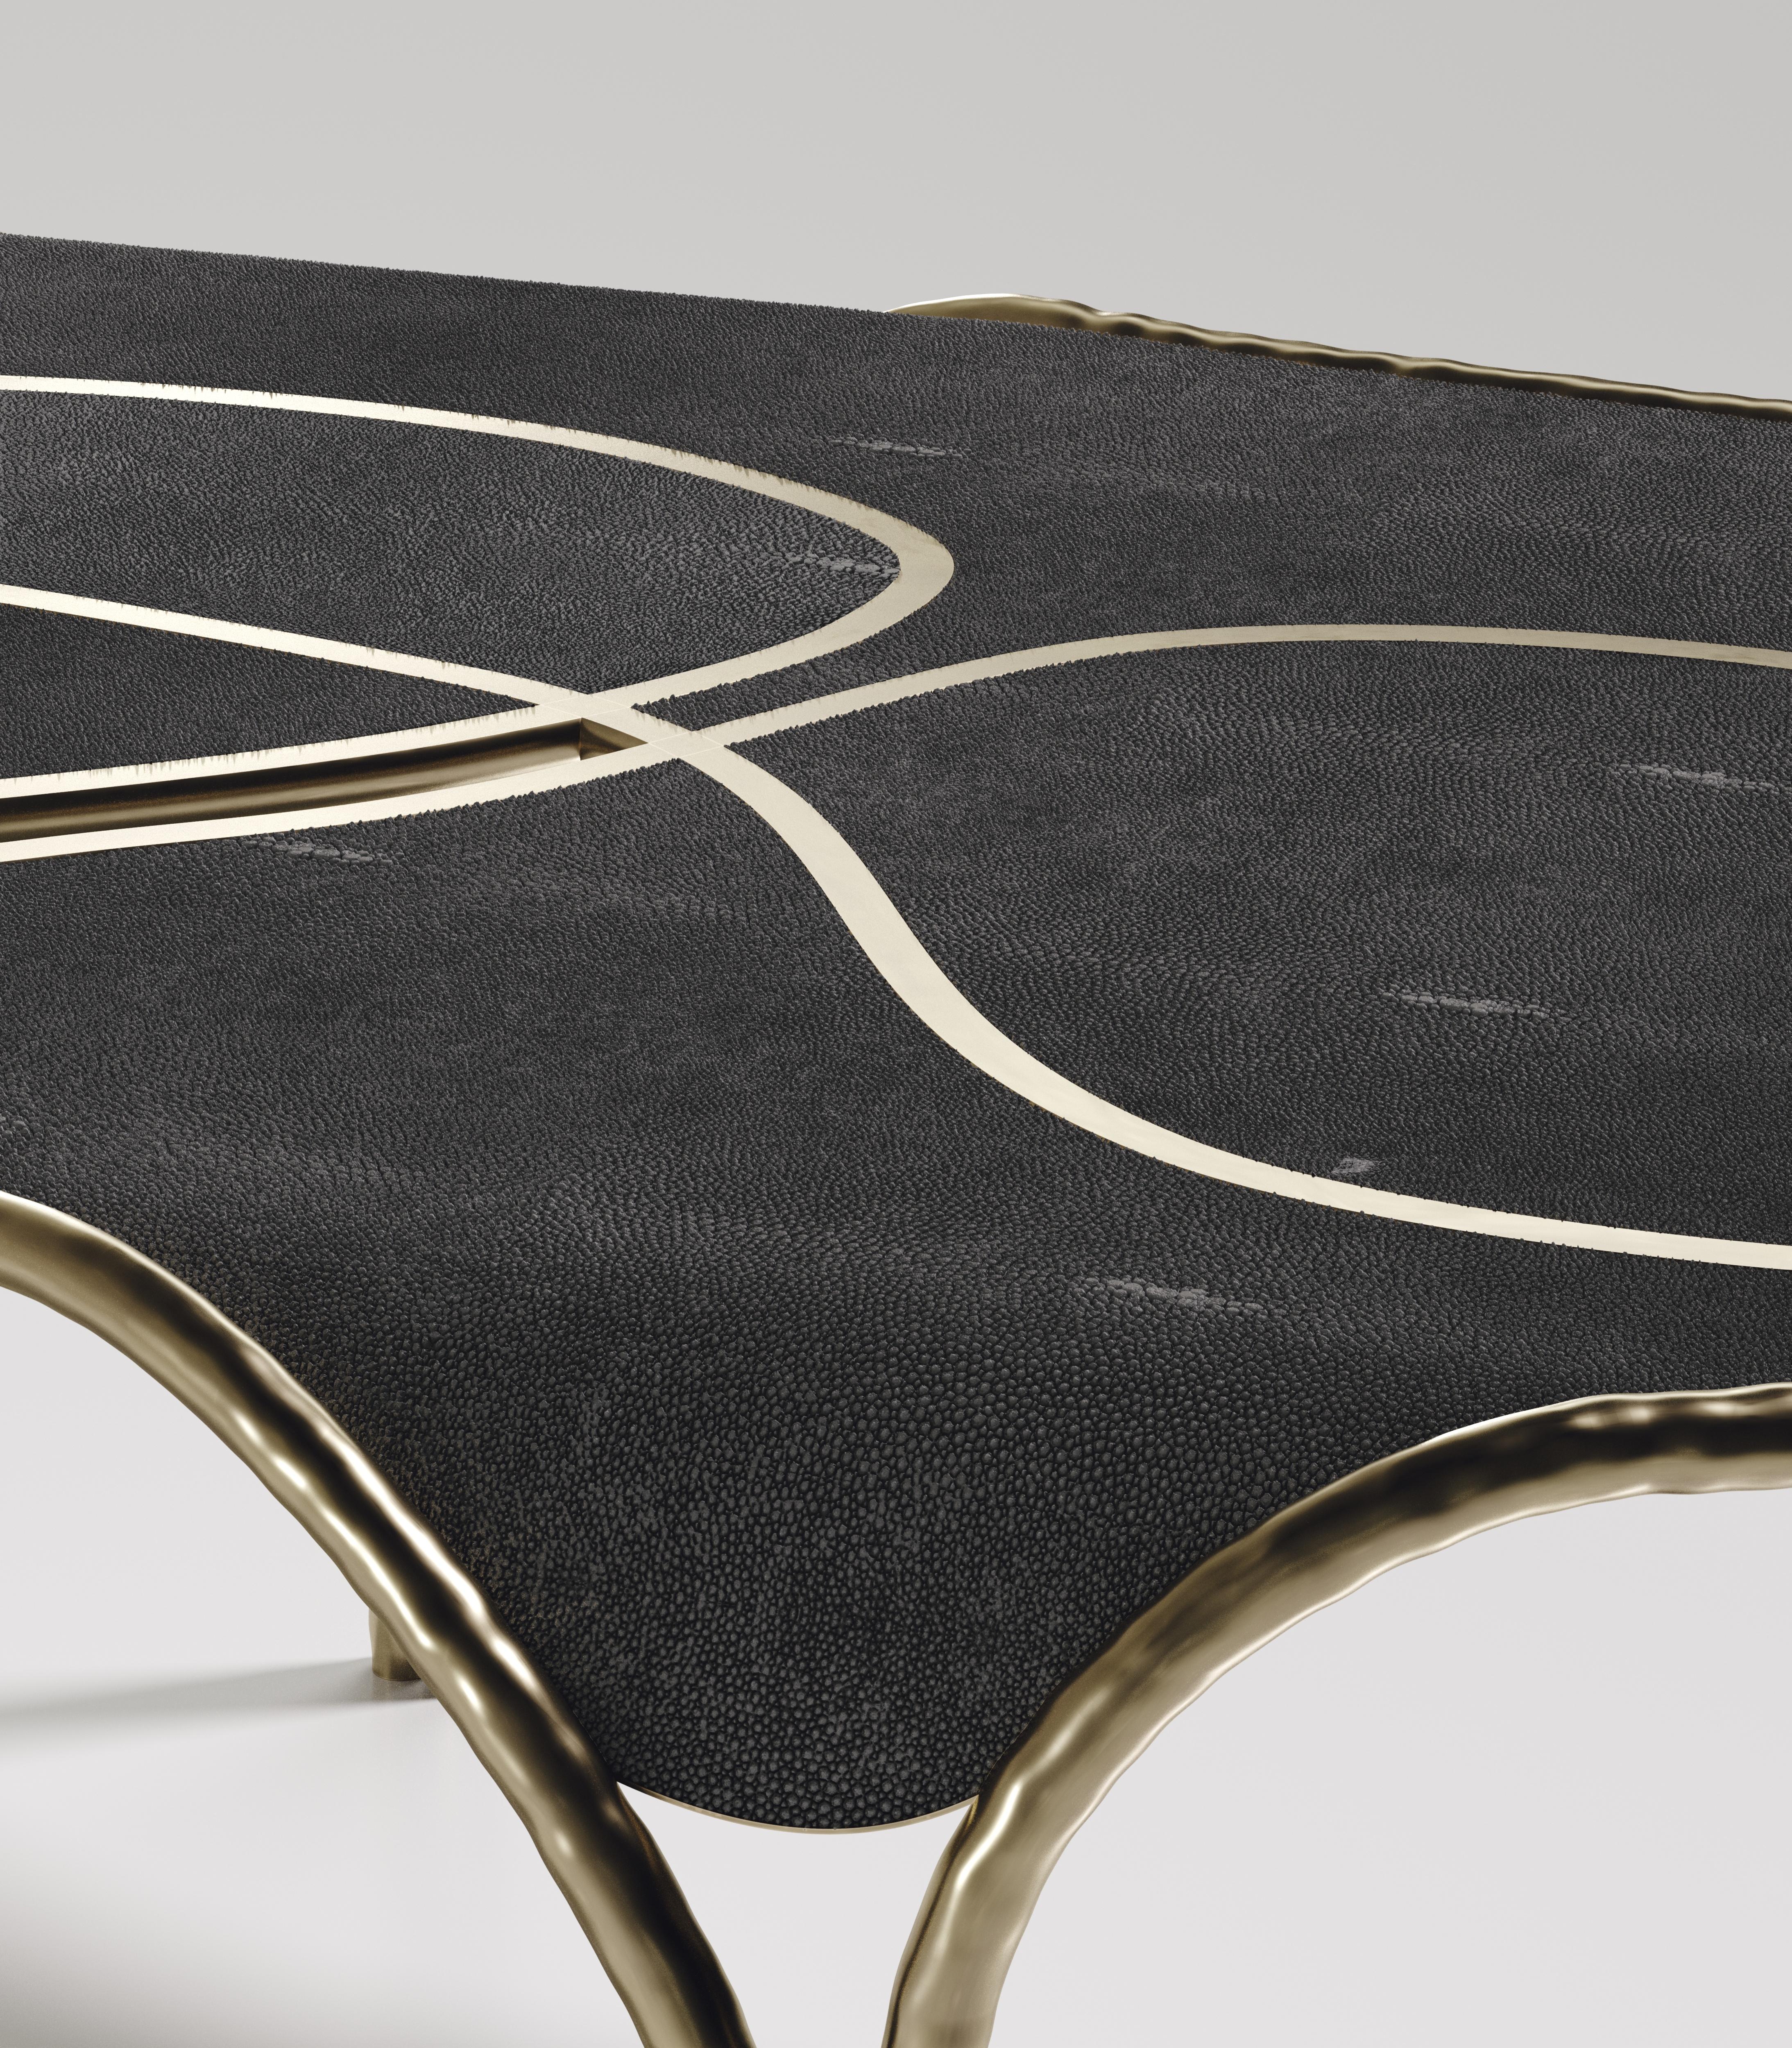 The Arianne coffee table by R&Y Augousti is one of a kind statement and whimsical piece. The overall piece is inlaid in coal black shagreen accentuated with intricate bronze-patina brass details that have the signature Augousti 